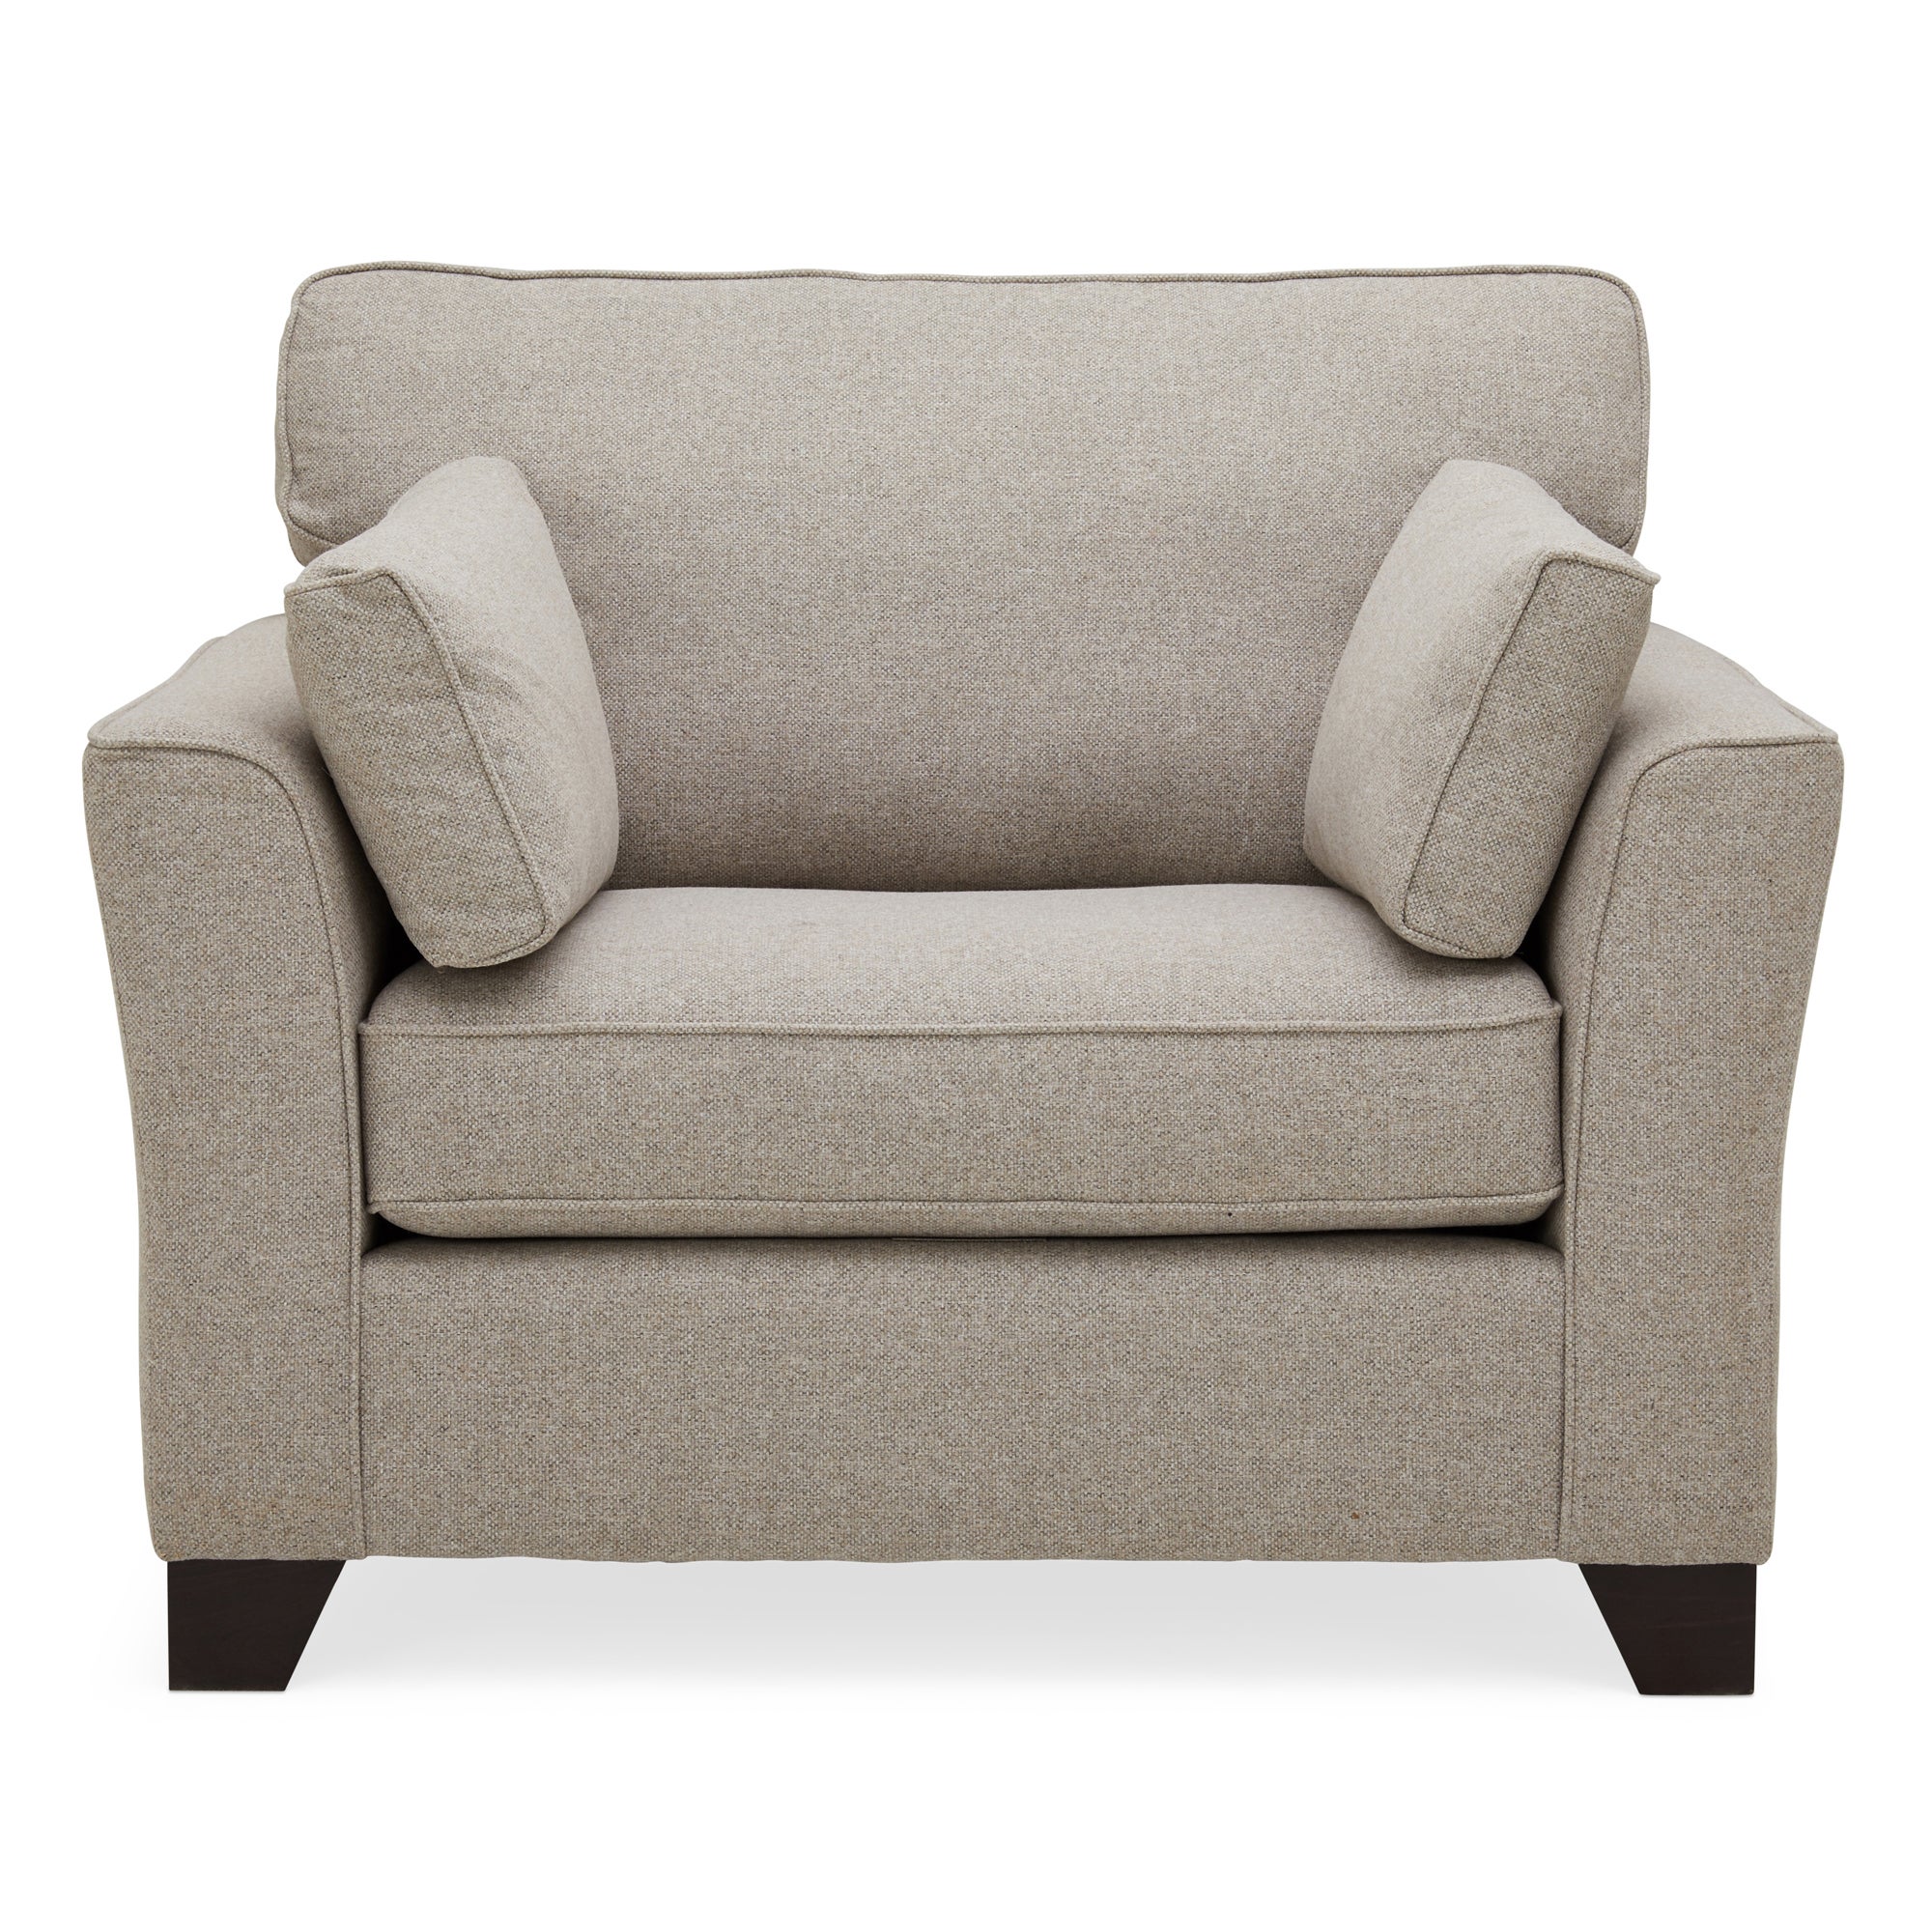 Photo of Grayson armchair natural